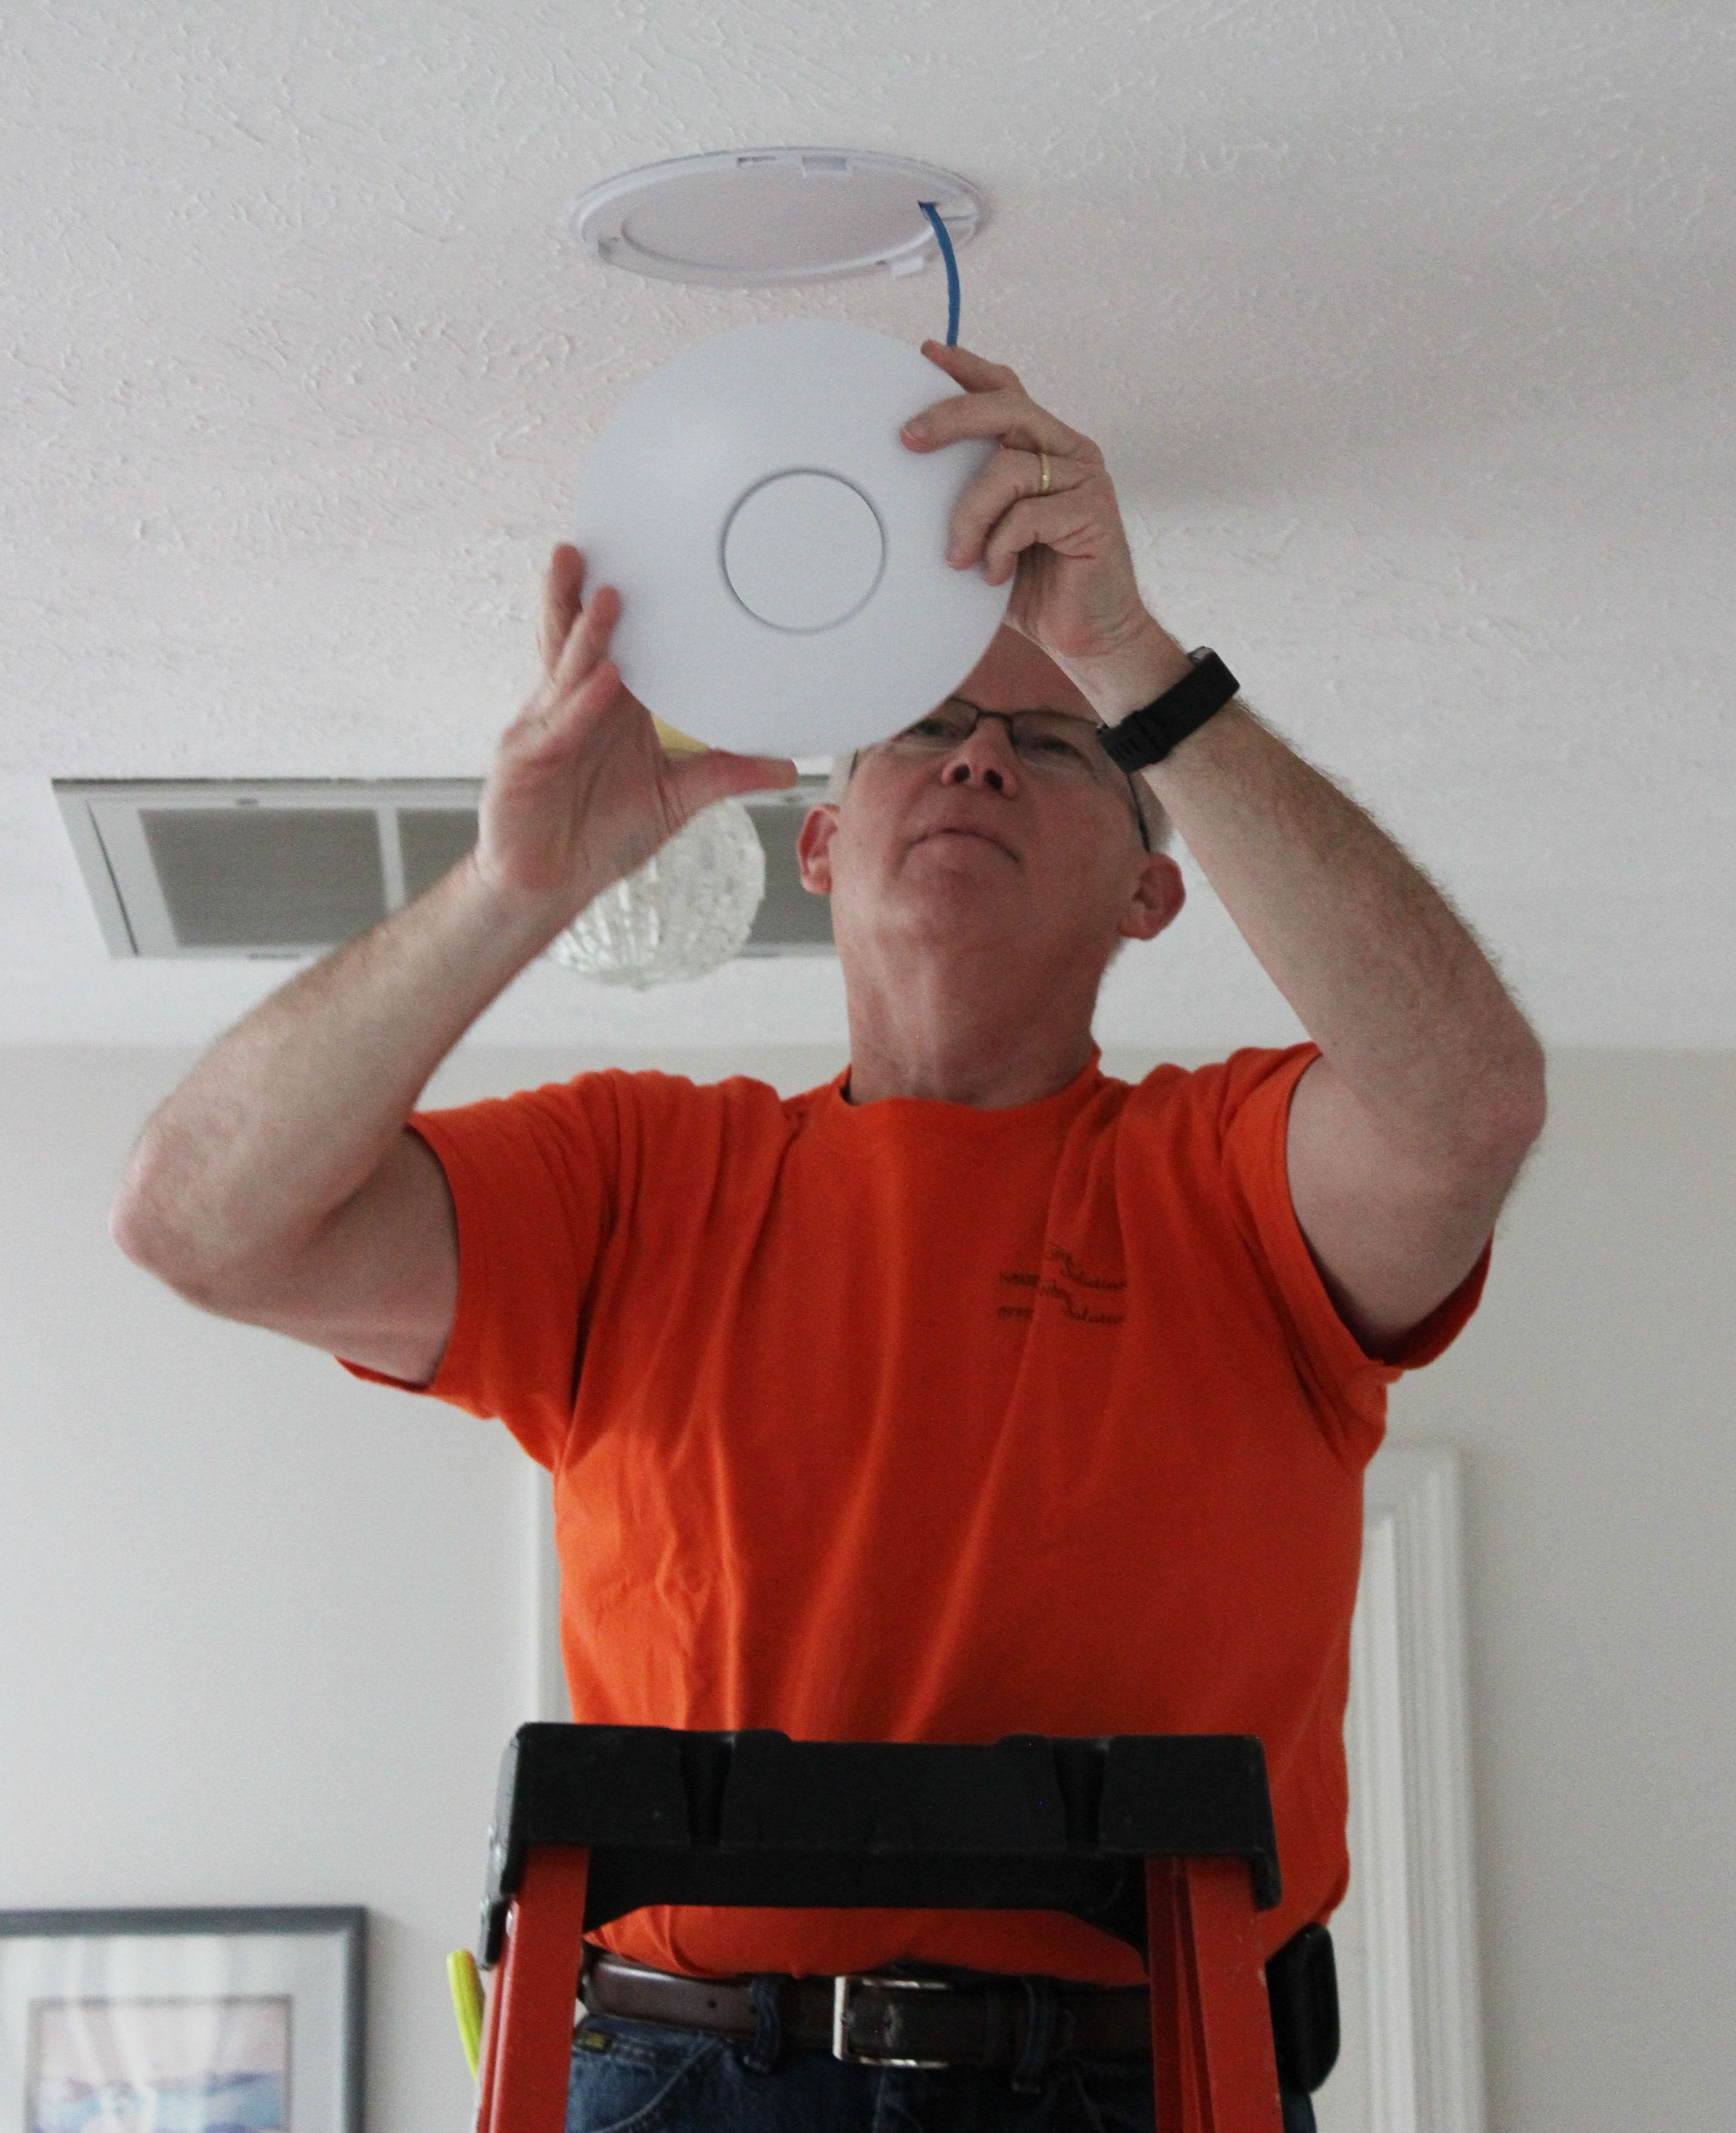 Installation of a Ubiquiti Networks Wi-Fi access point in a home.